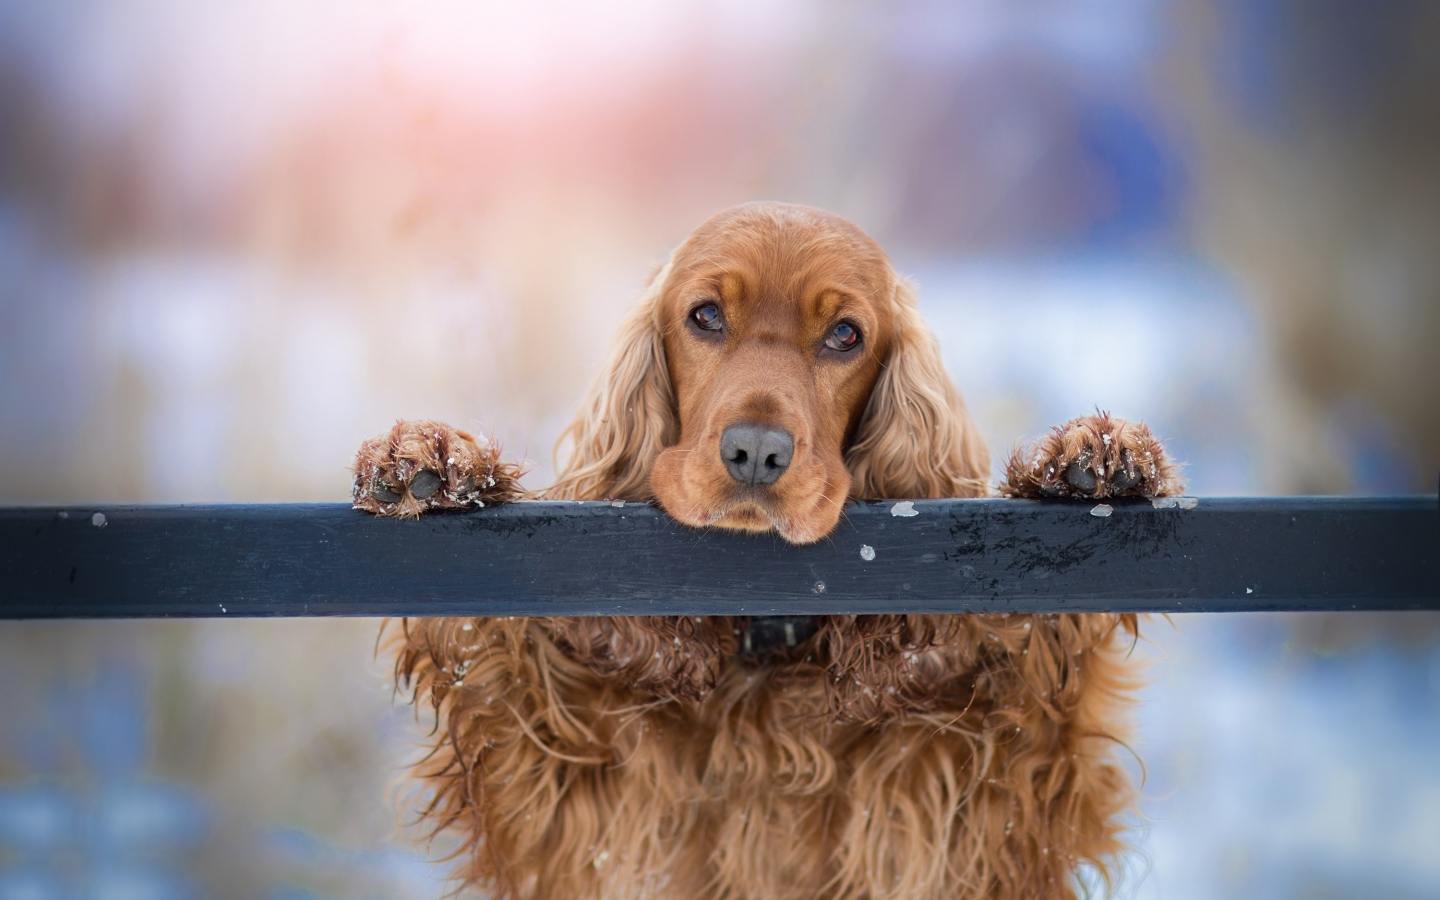 Sad brown spaniel at the fence